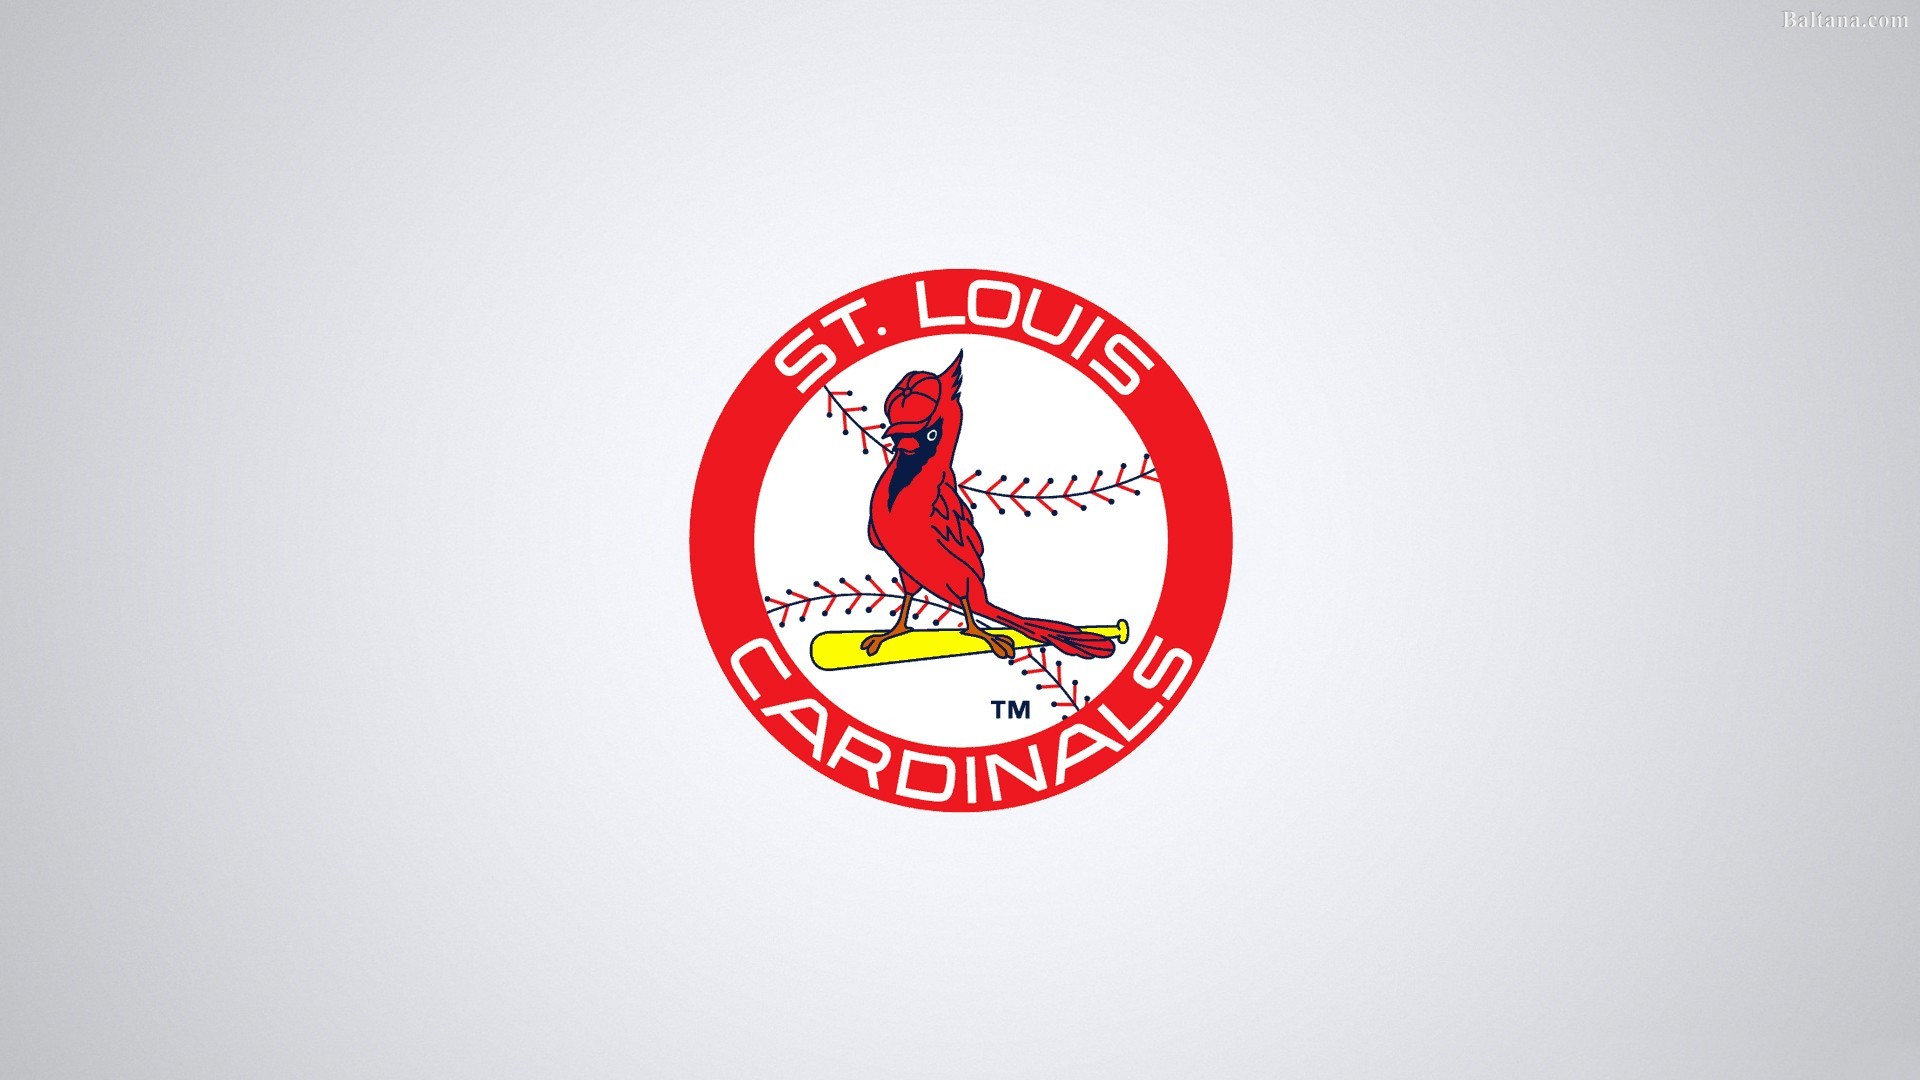 St Louis Cardinals on Twitter Need new wallpaper for the new month We  got you covered  x WallpaperWednesday httpstcowvn7OTexAF  Twitter